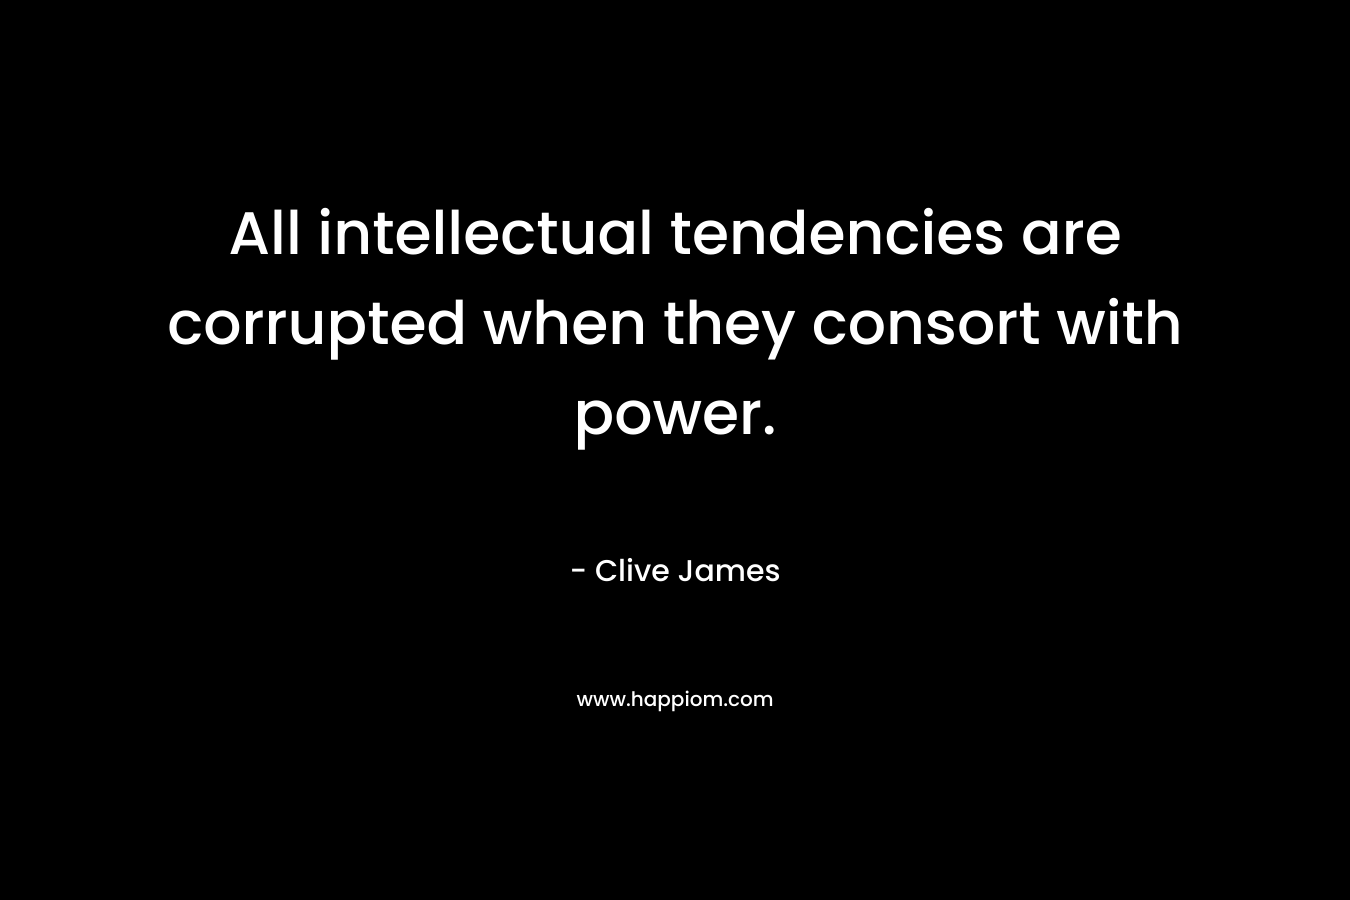 All intellectual tendencies are corrupted when they consort with power. – Clive James